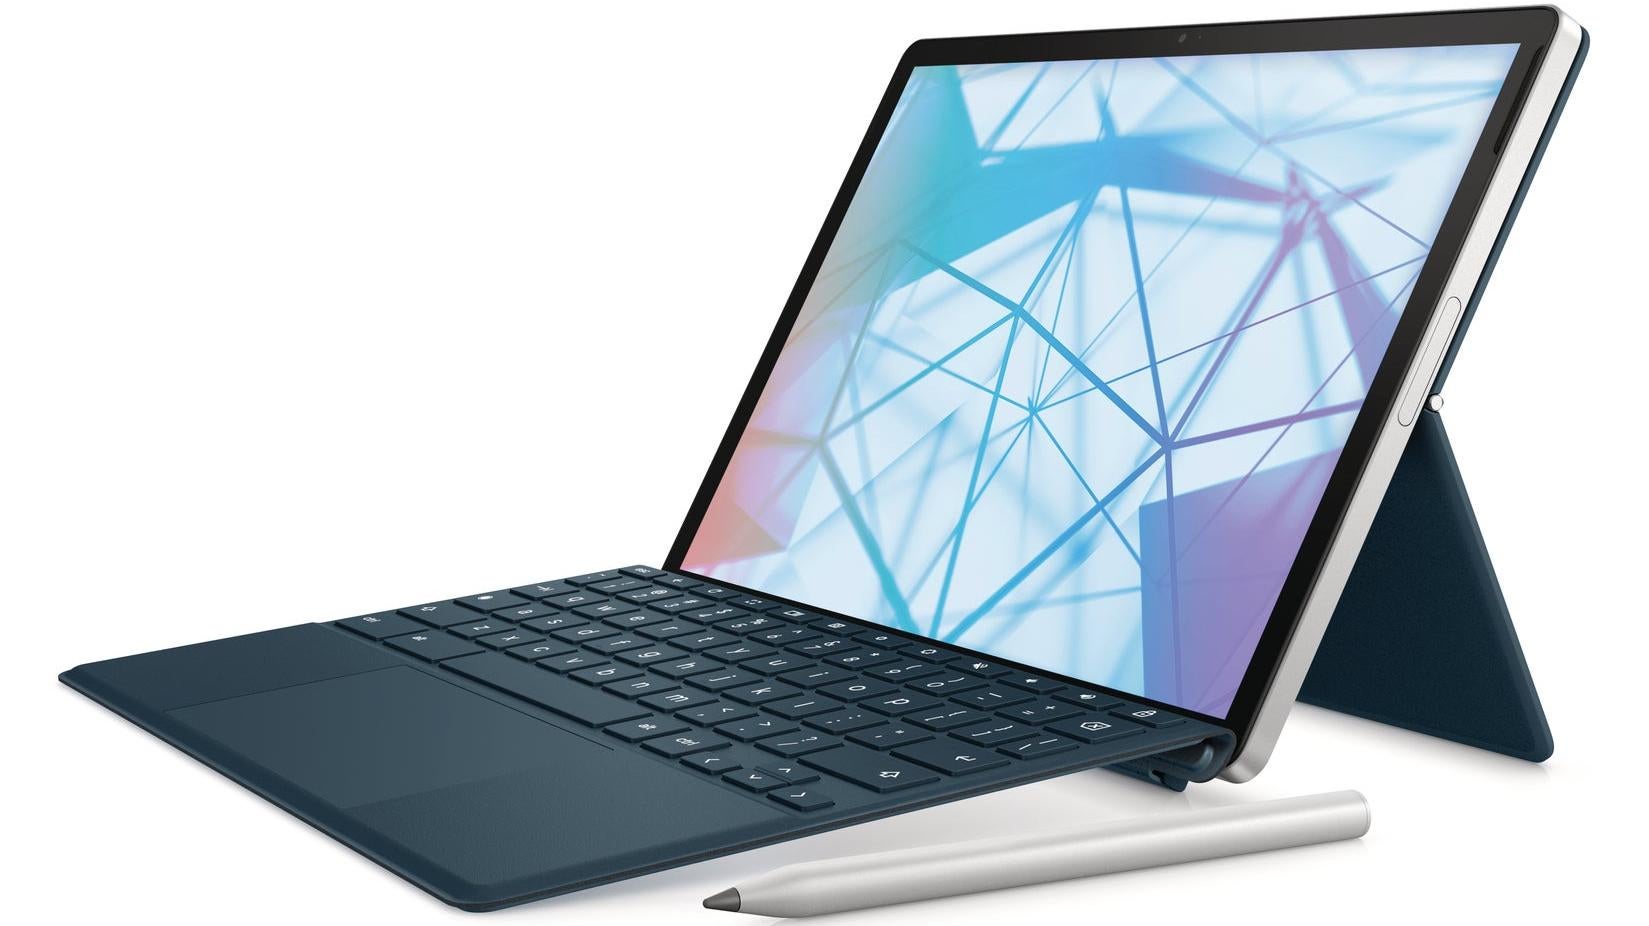 HP's Chromebook x2 11 will come bundled with its detachable keyboard and a stylus included. (Image: HP)